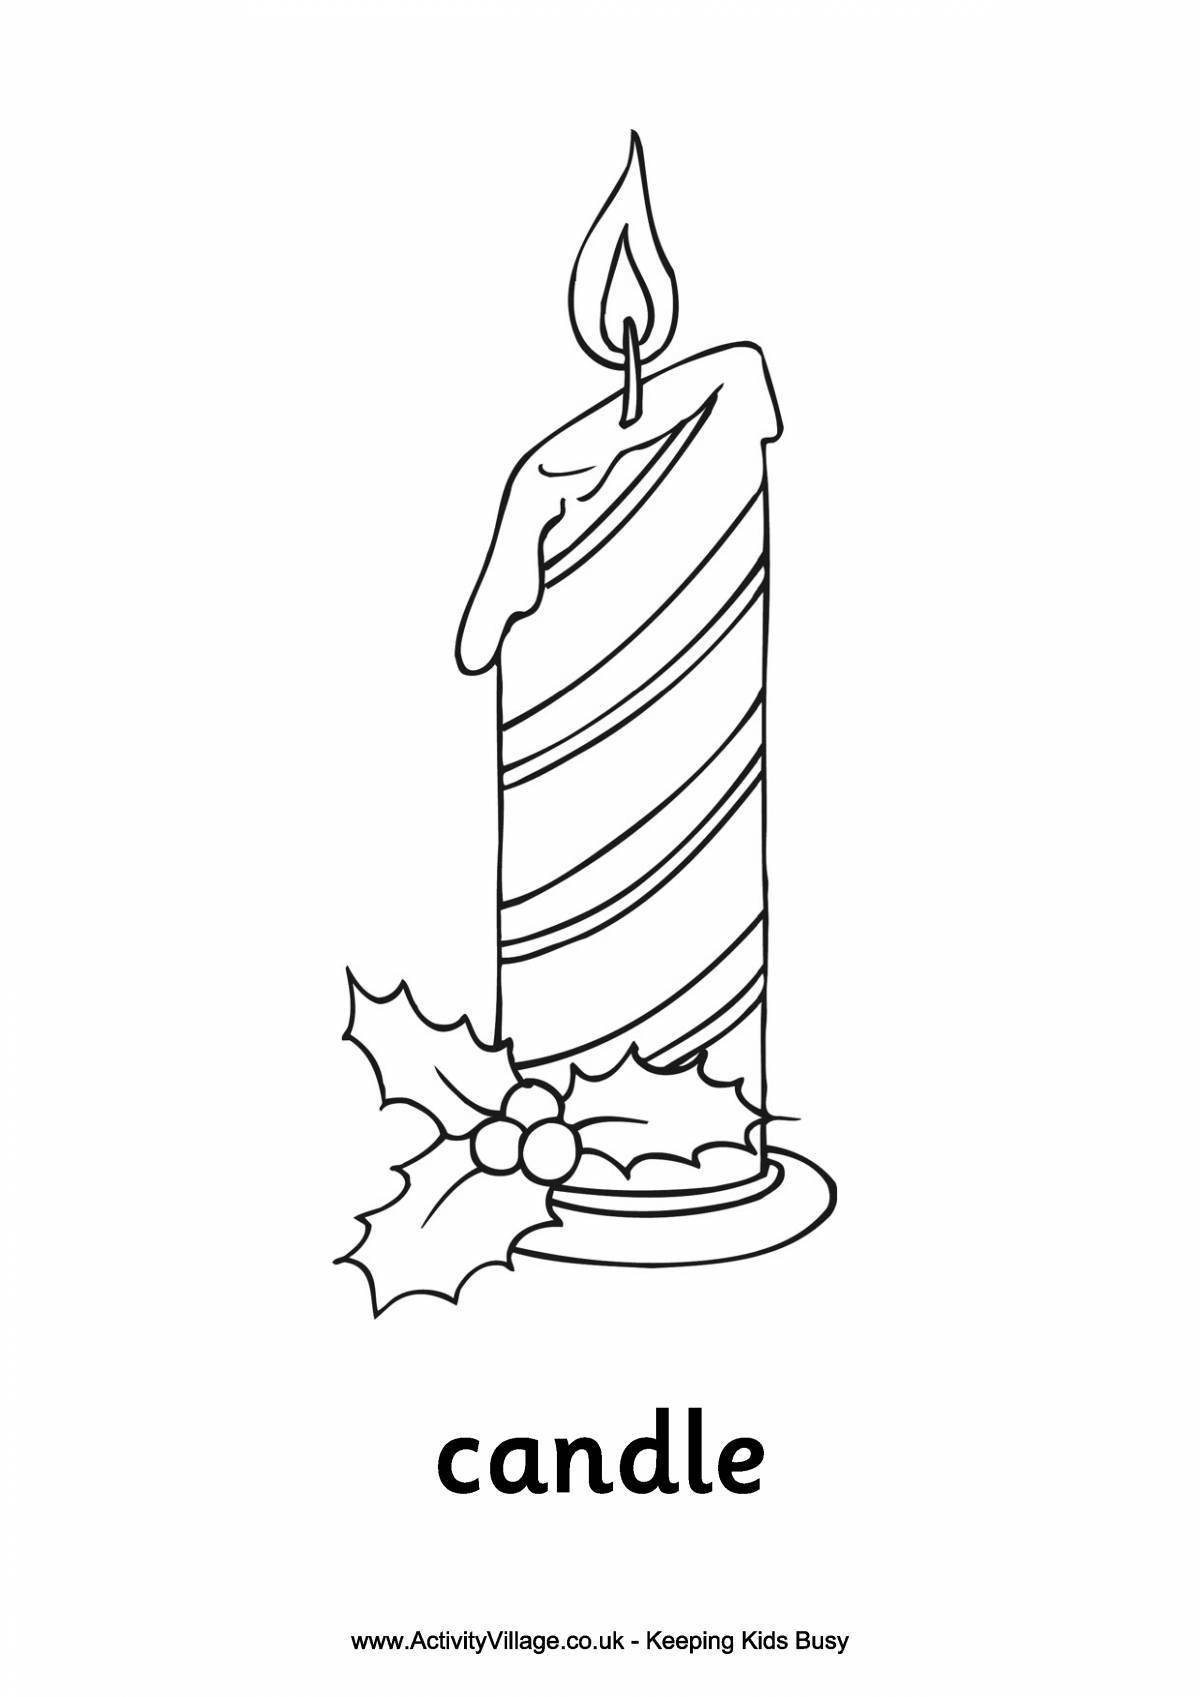 Coloring bright candle for children